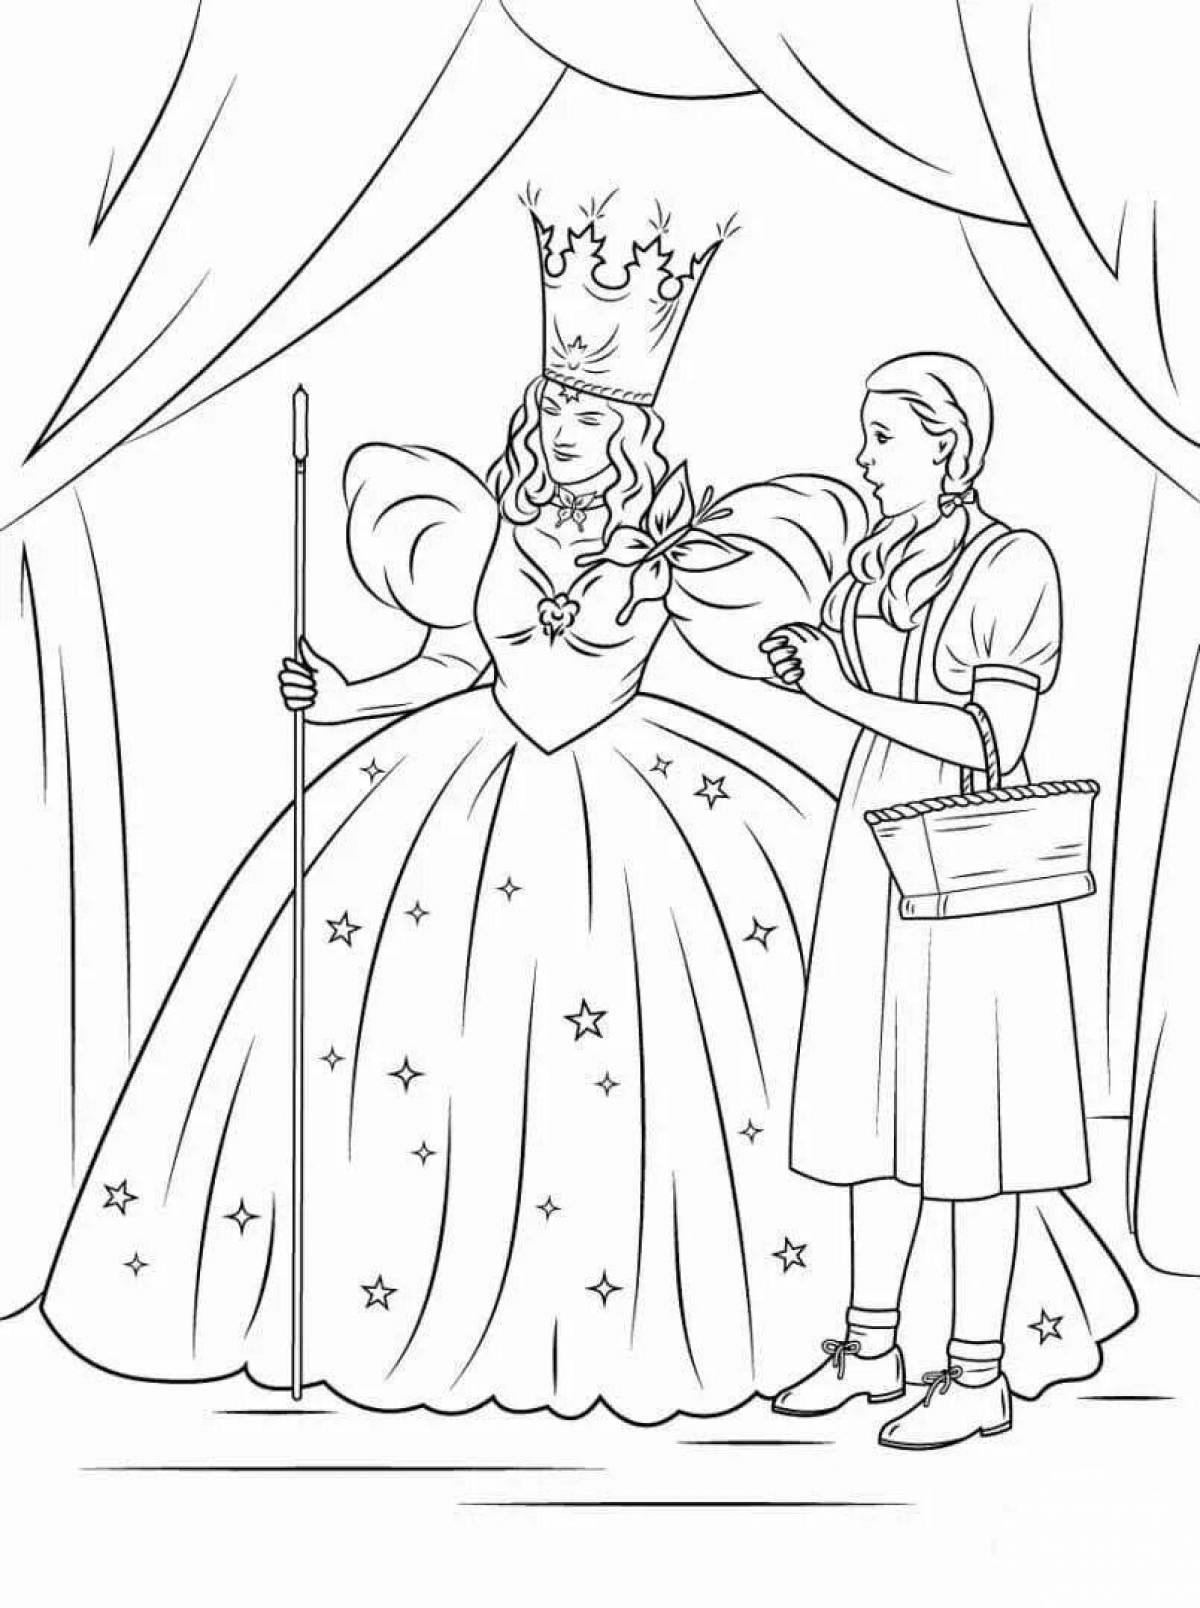 Coloring page shining wizard of oz